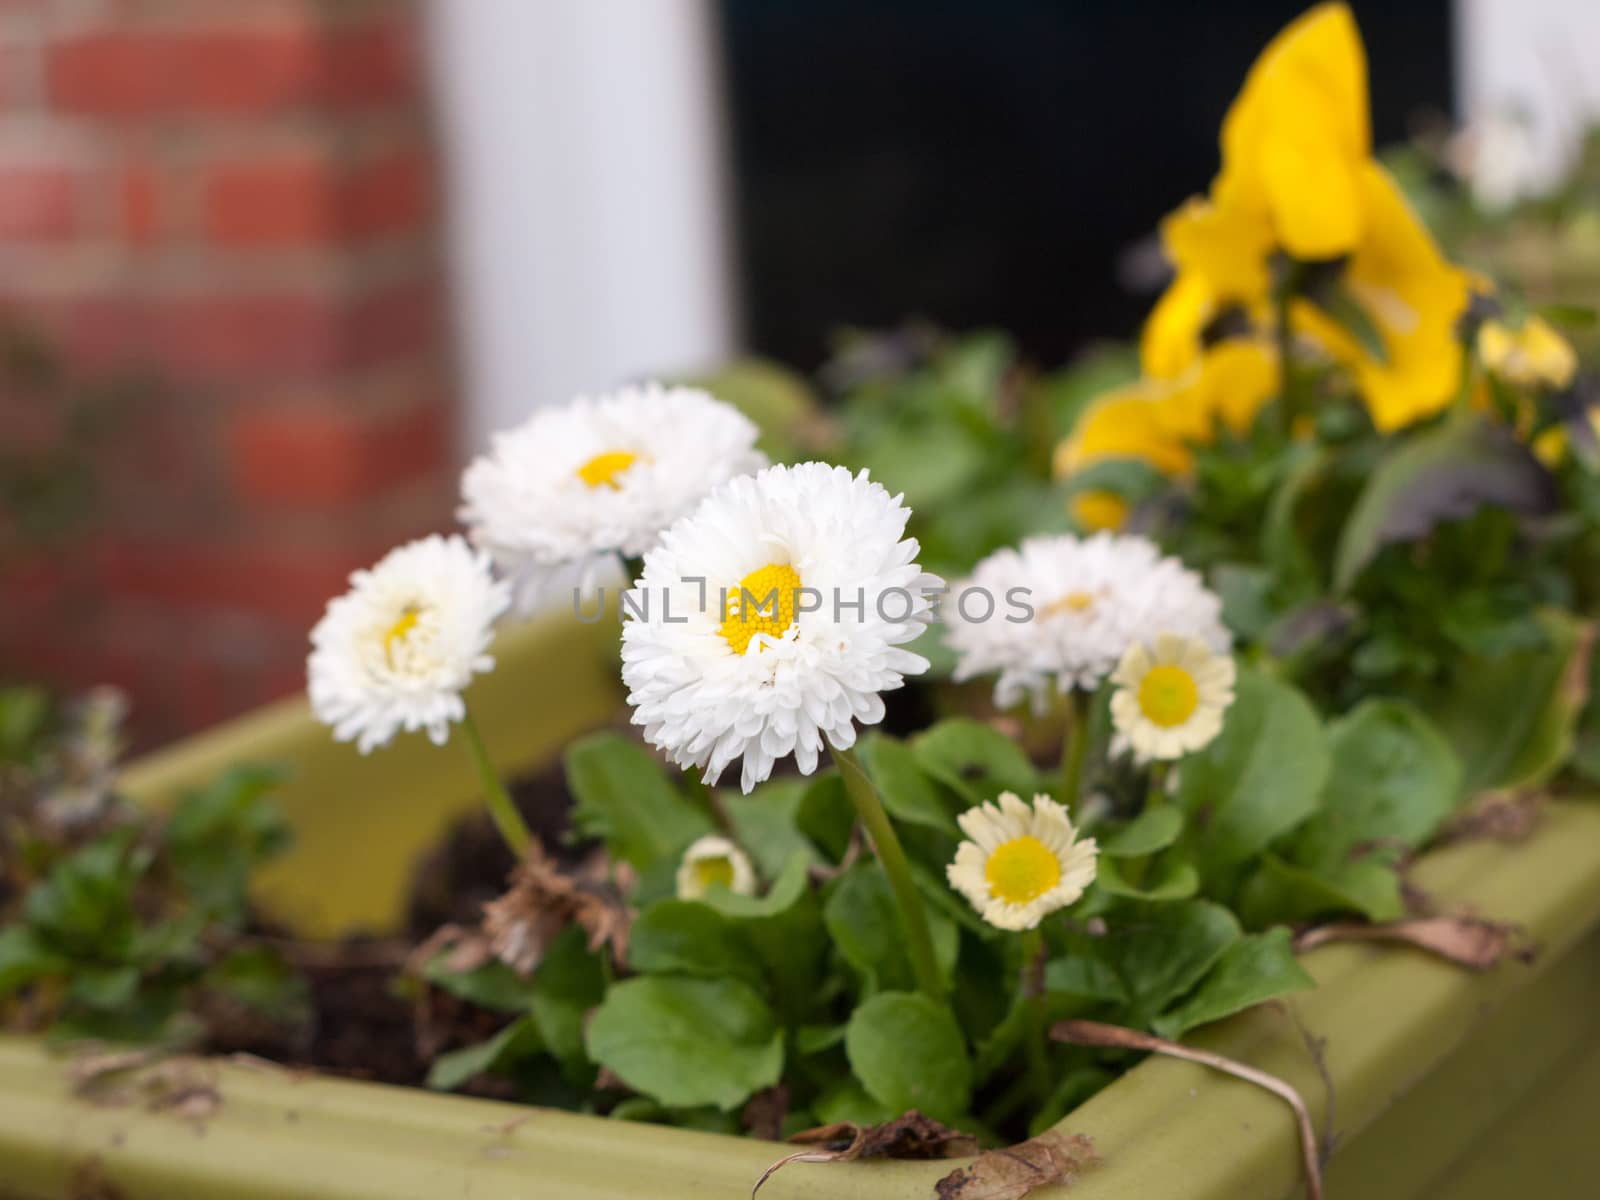 A Beautiful Bunch of Daisies in a Plant Pot by callumrc